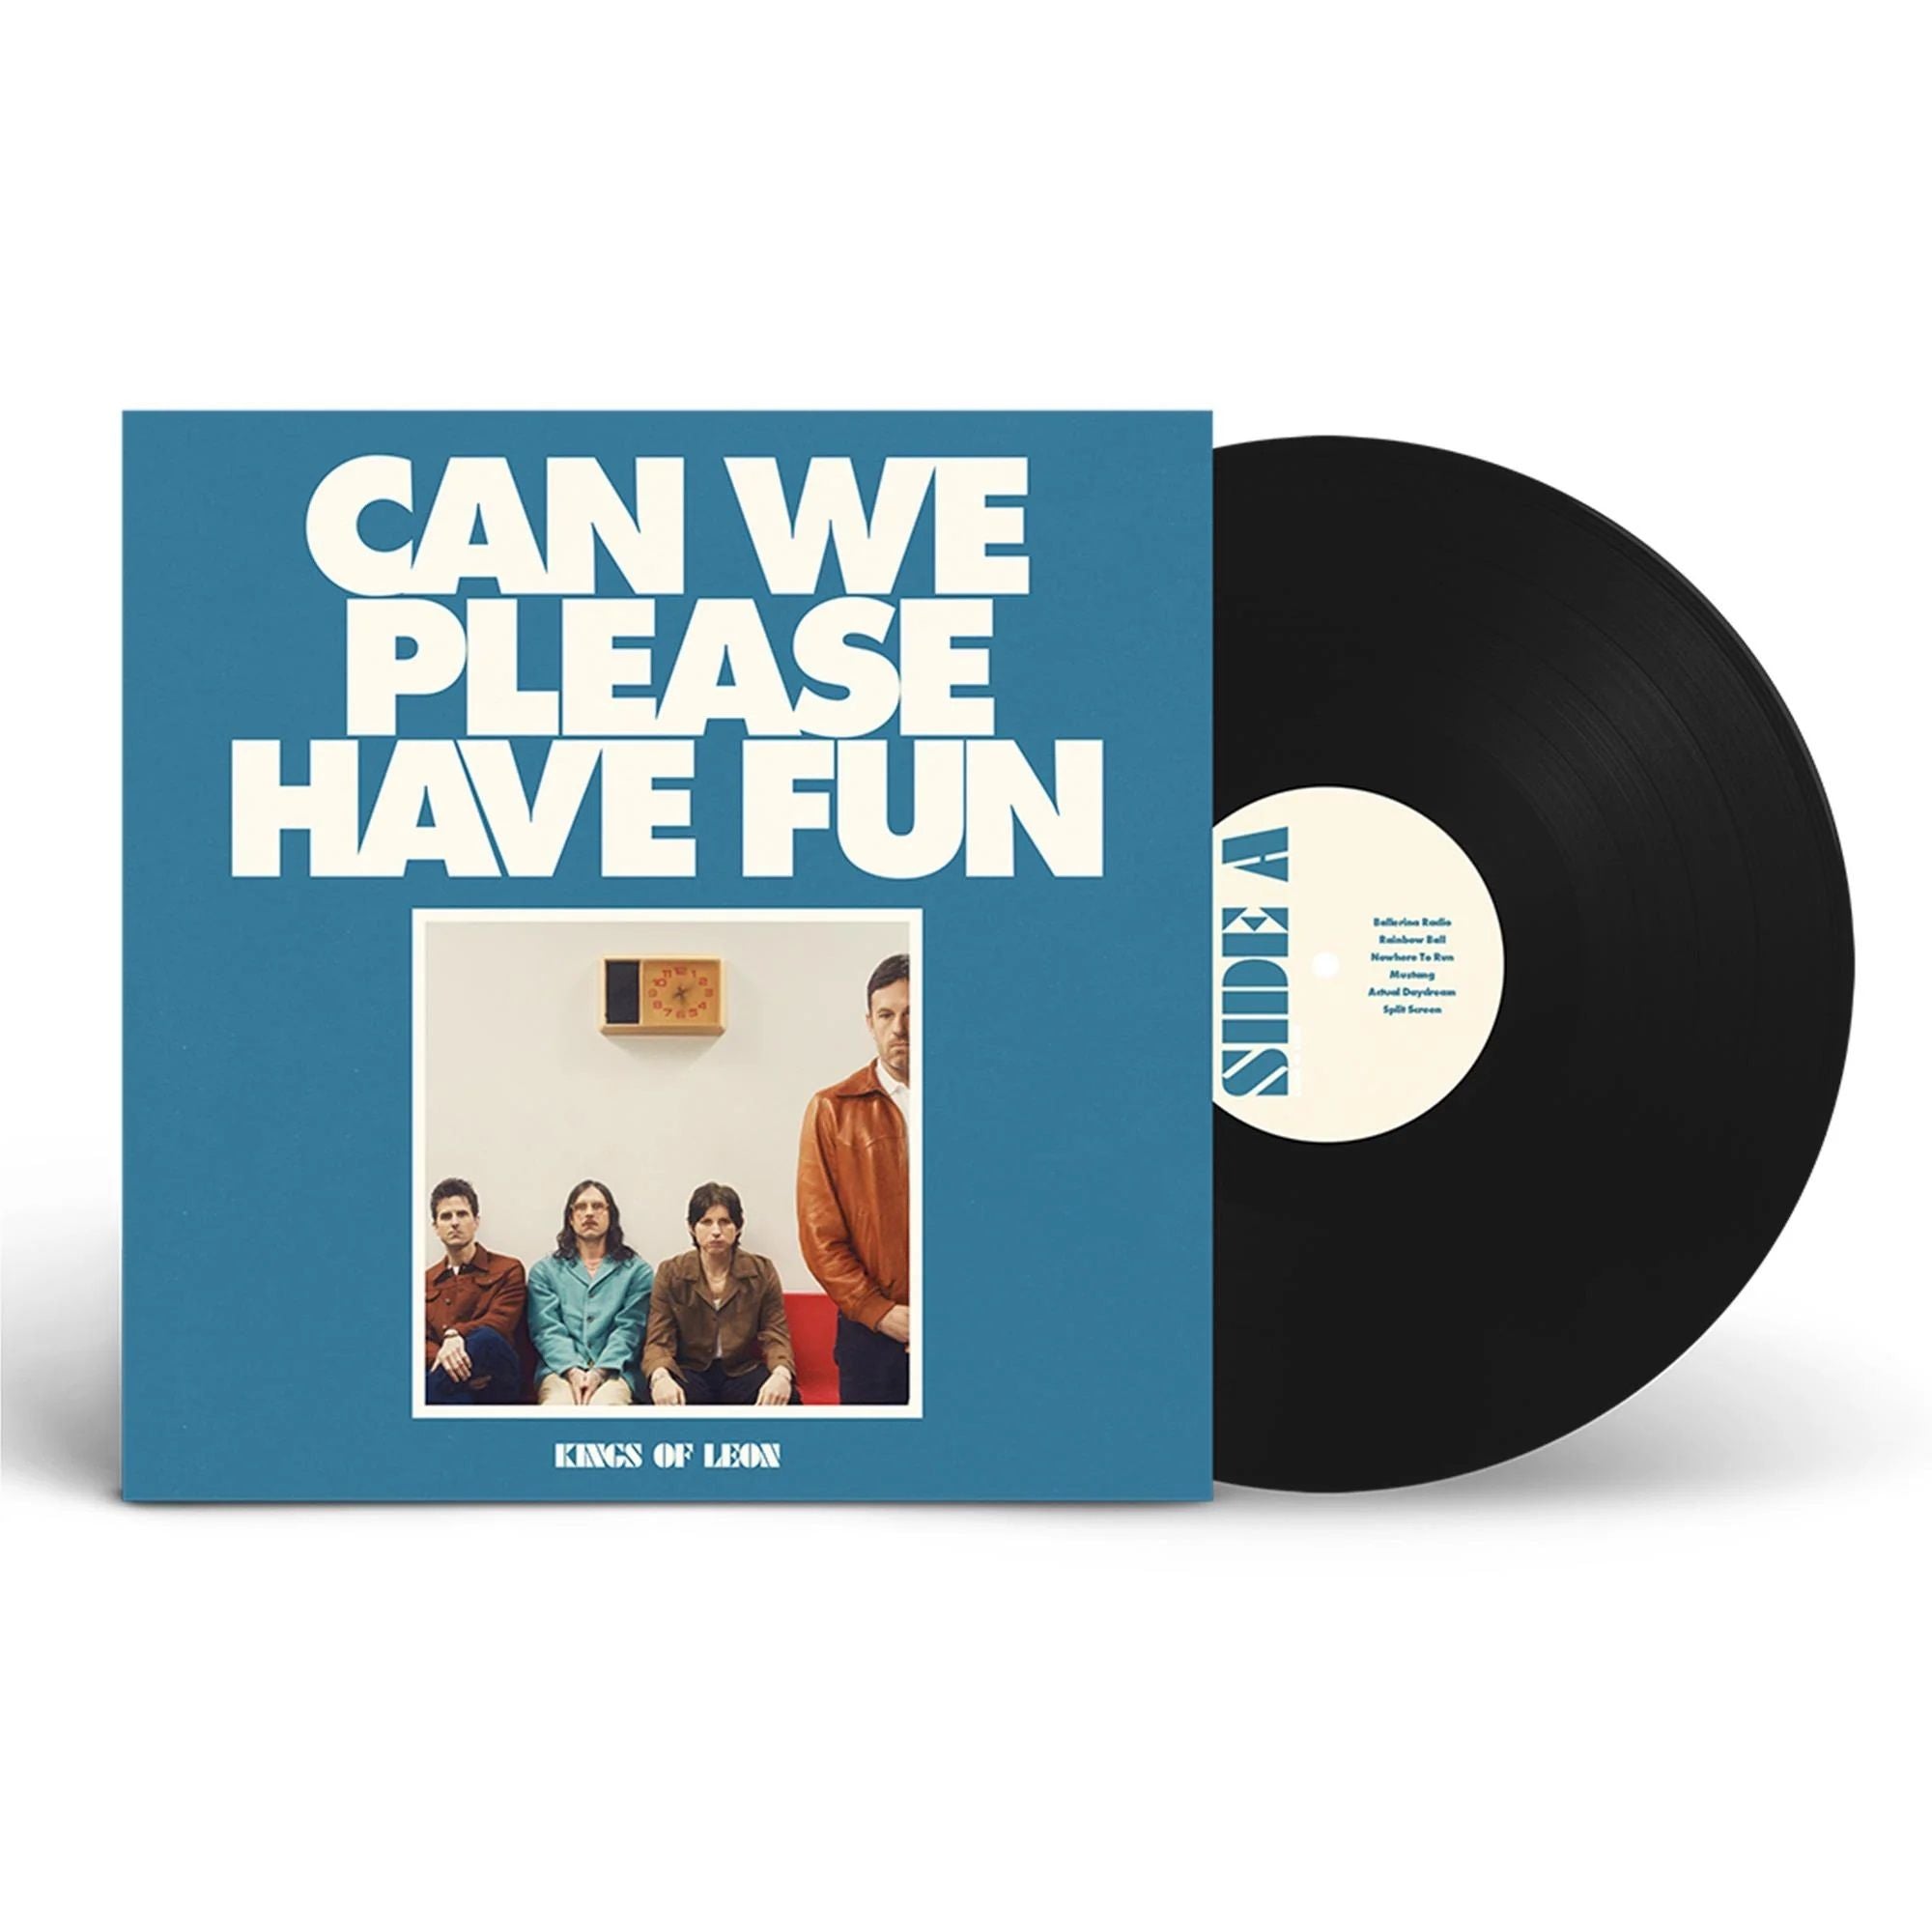 Kings Of Leon - Can We Please Have Fun (gatefold) - Vinyl - New